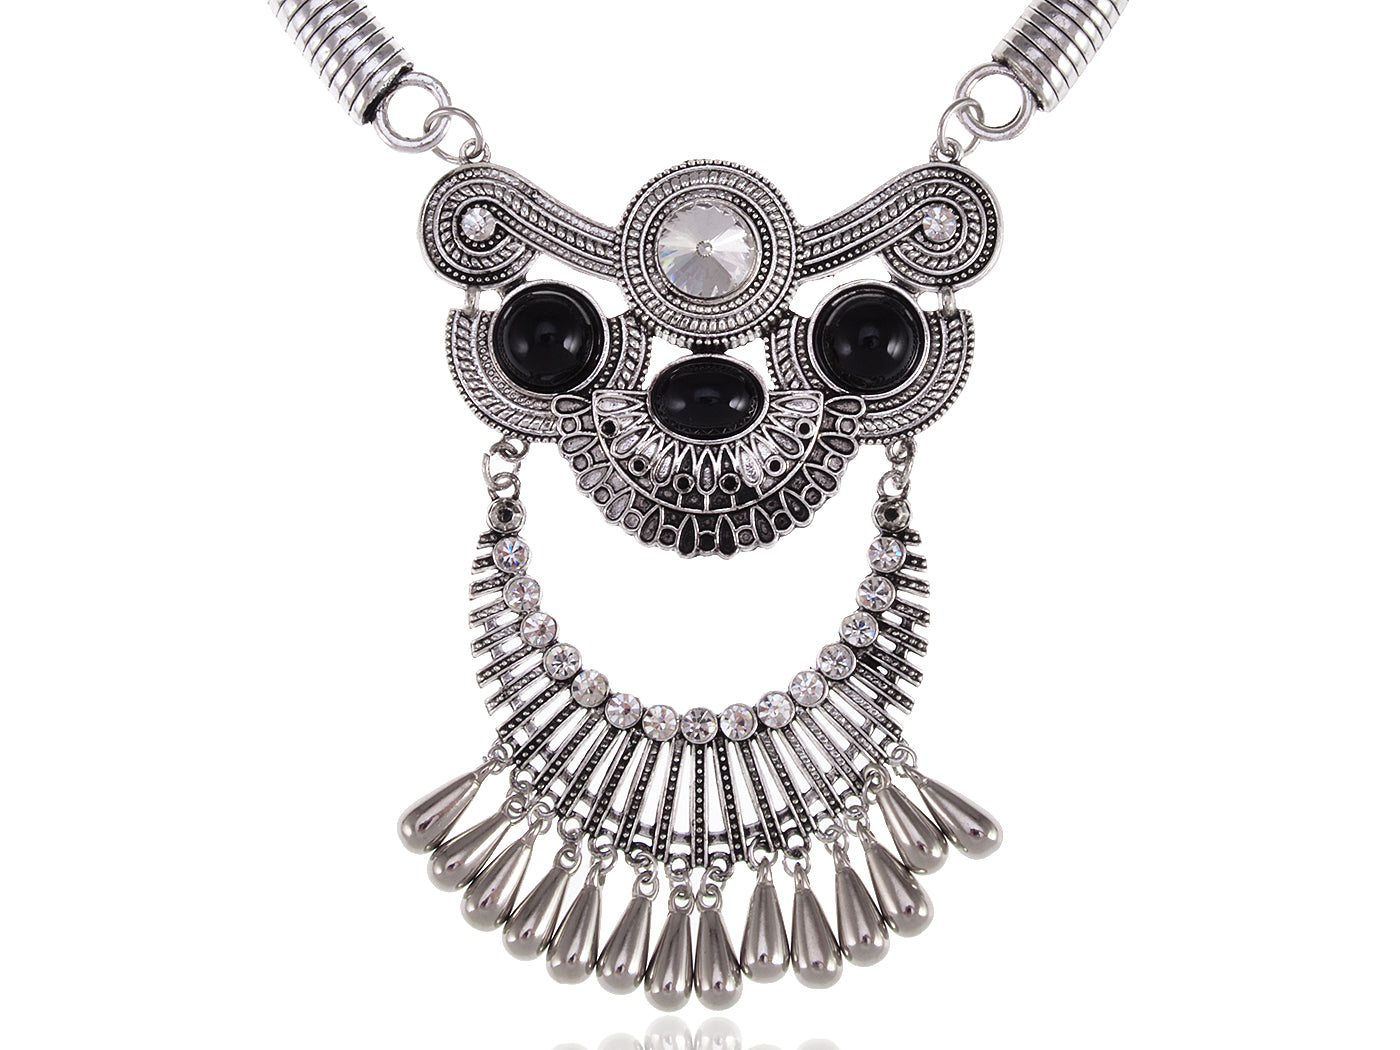 Black Colored Statement Collar Necklace